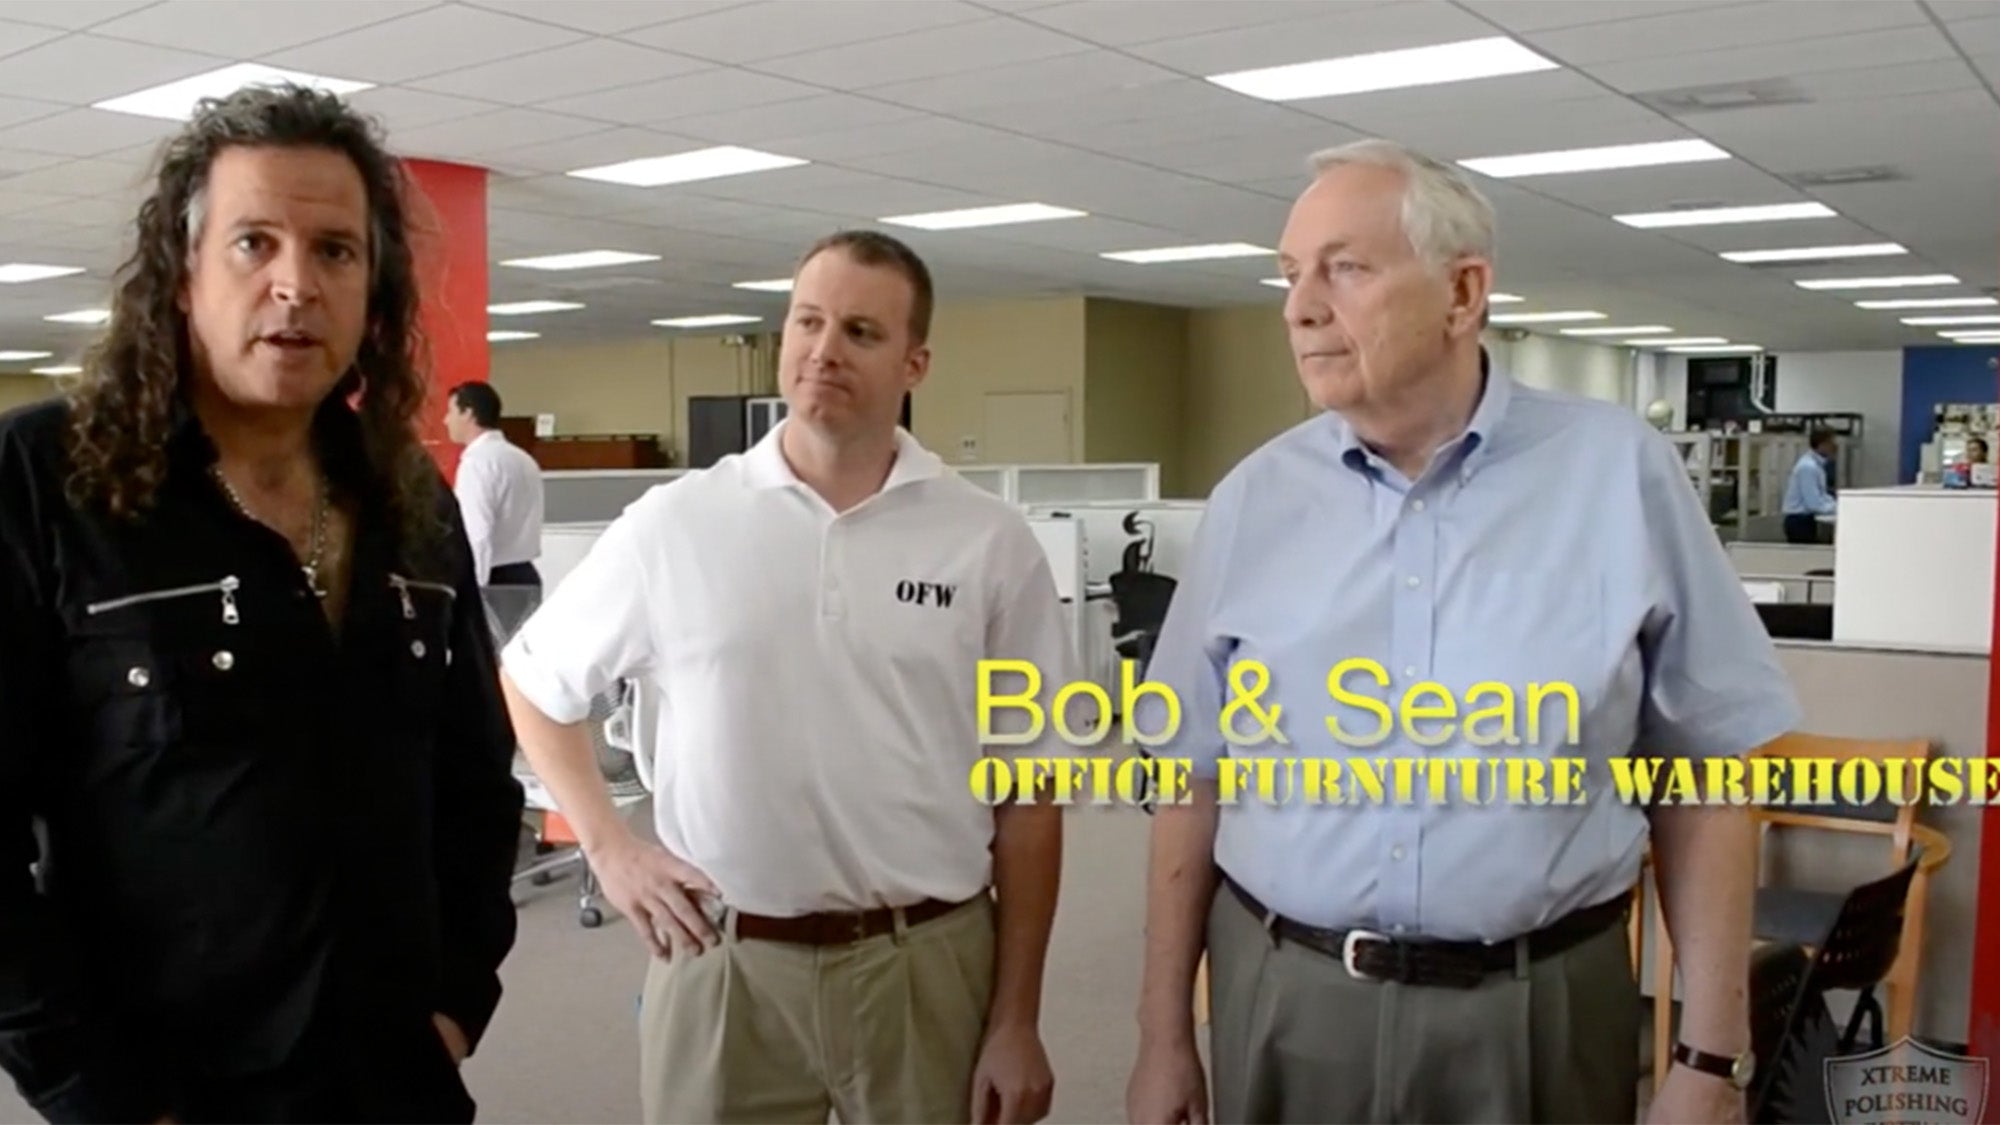 XPS video - Office furniture warehouse testimonial with Bob and Sean